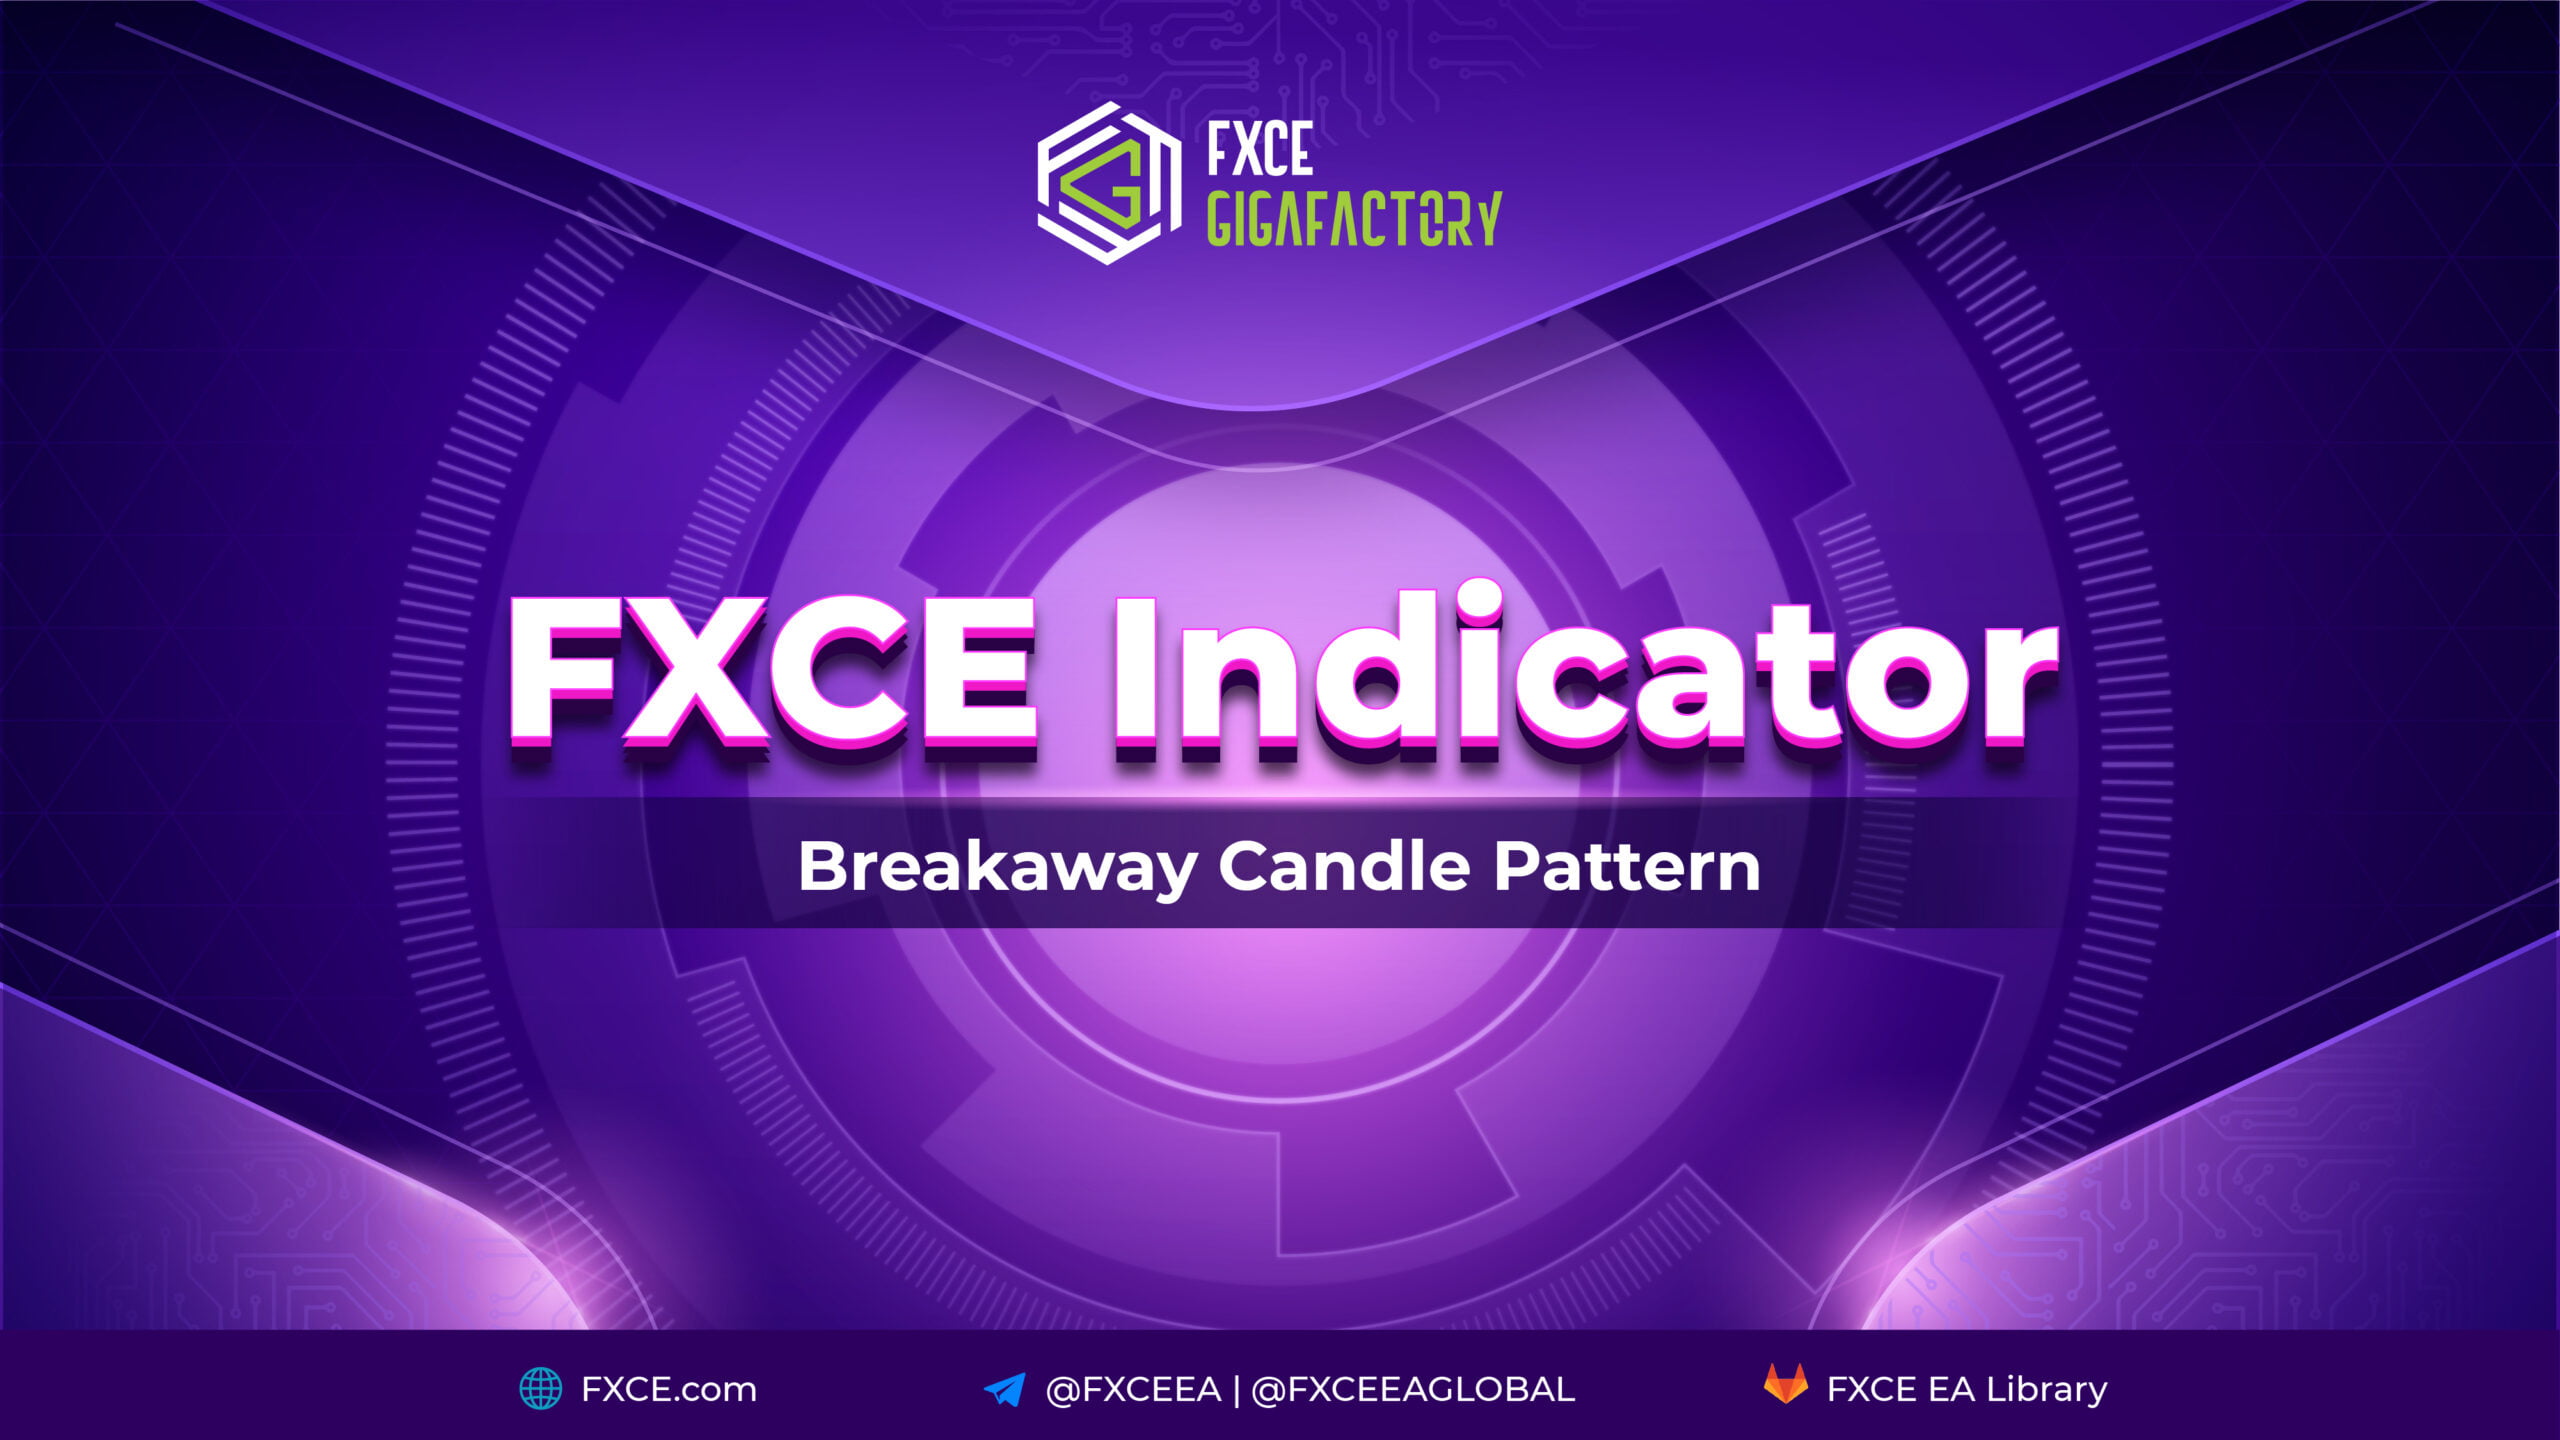 FXCE Indicator Breakaway Candle Pattern